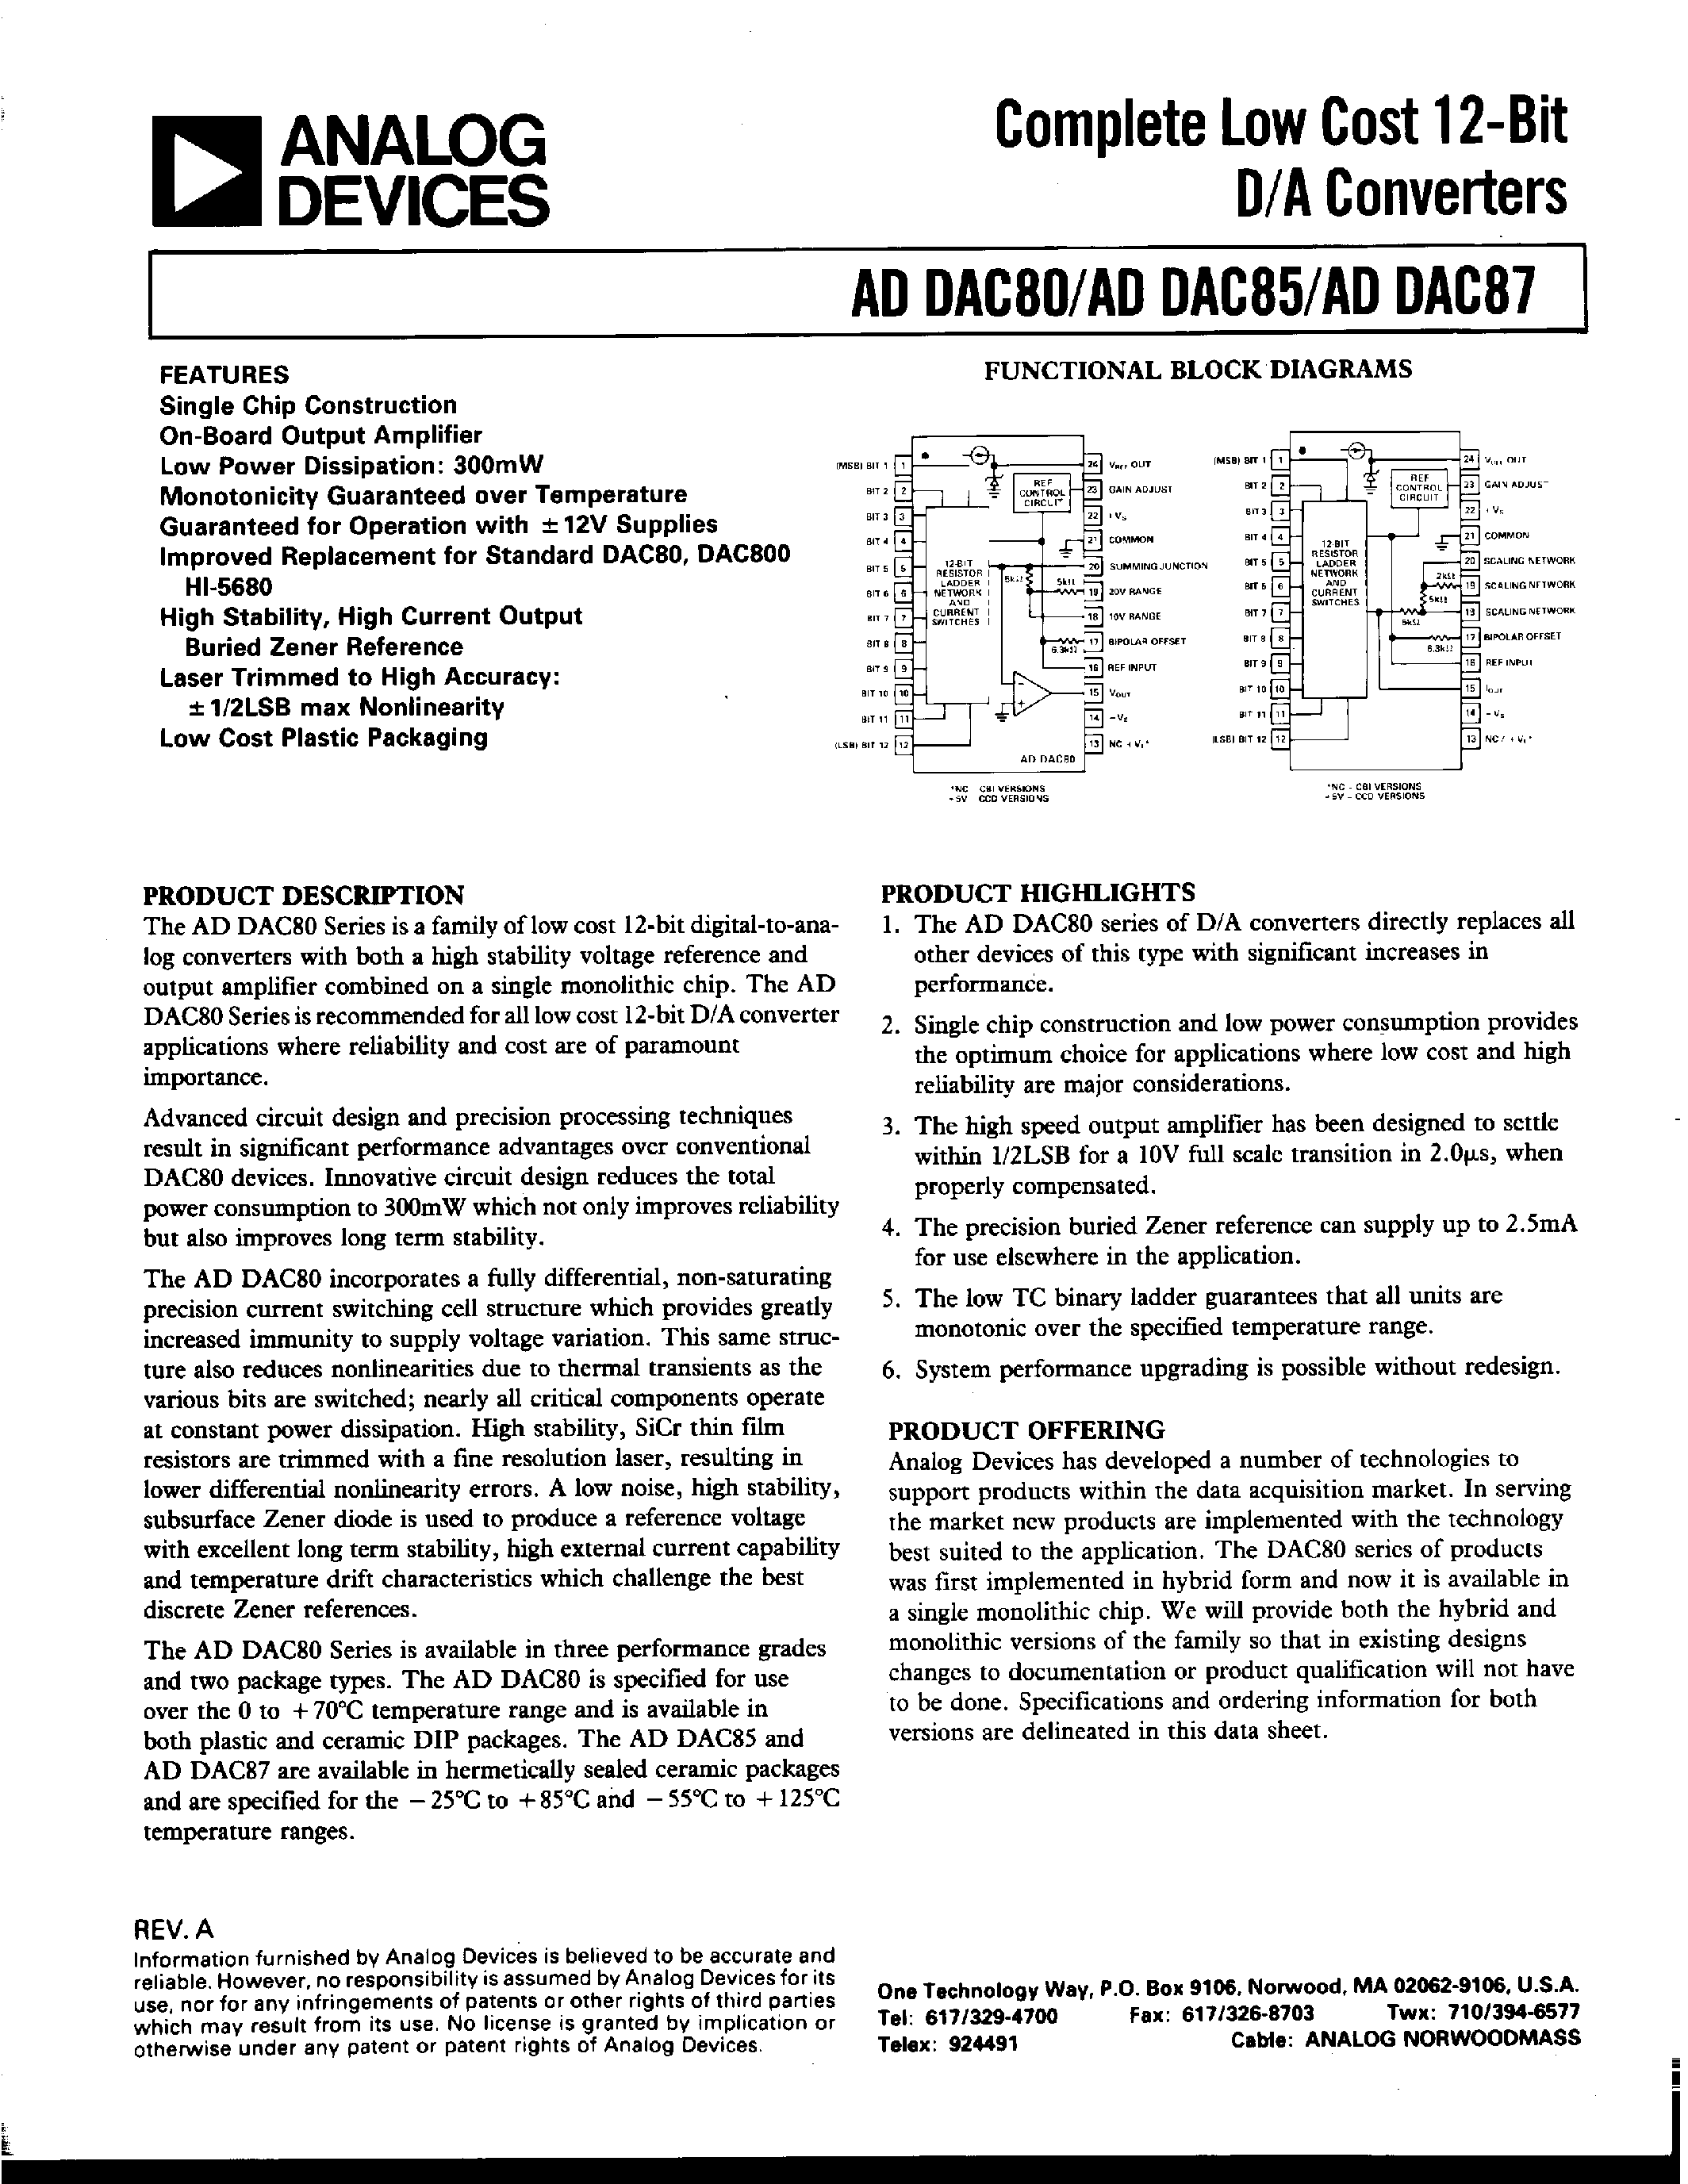 Datasheet ADDAC85-CBI-I - COMPLETE LOW COST 12-BIT D/A CONVERTERS page 1